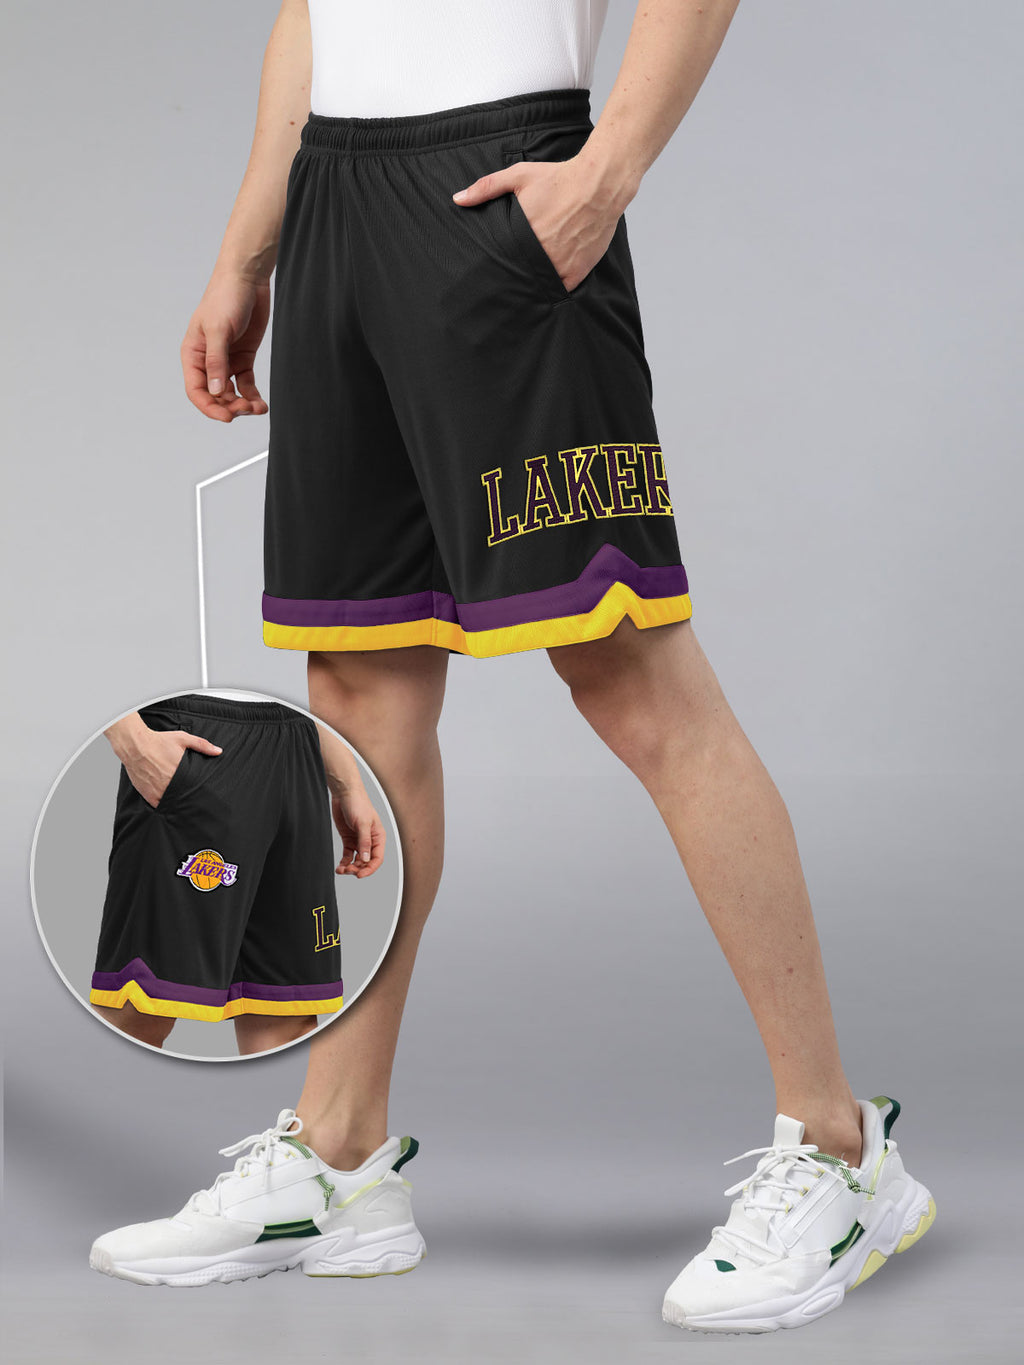 Los Angeles Lakers: Embroidered Basketball Shorts - Black – Shop